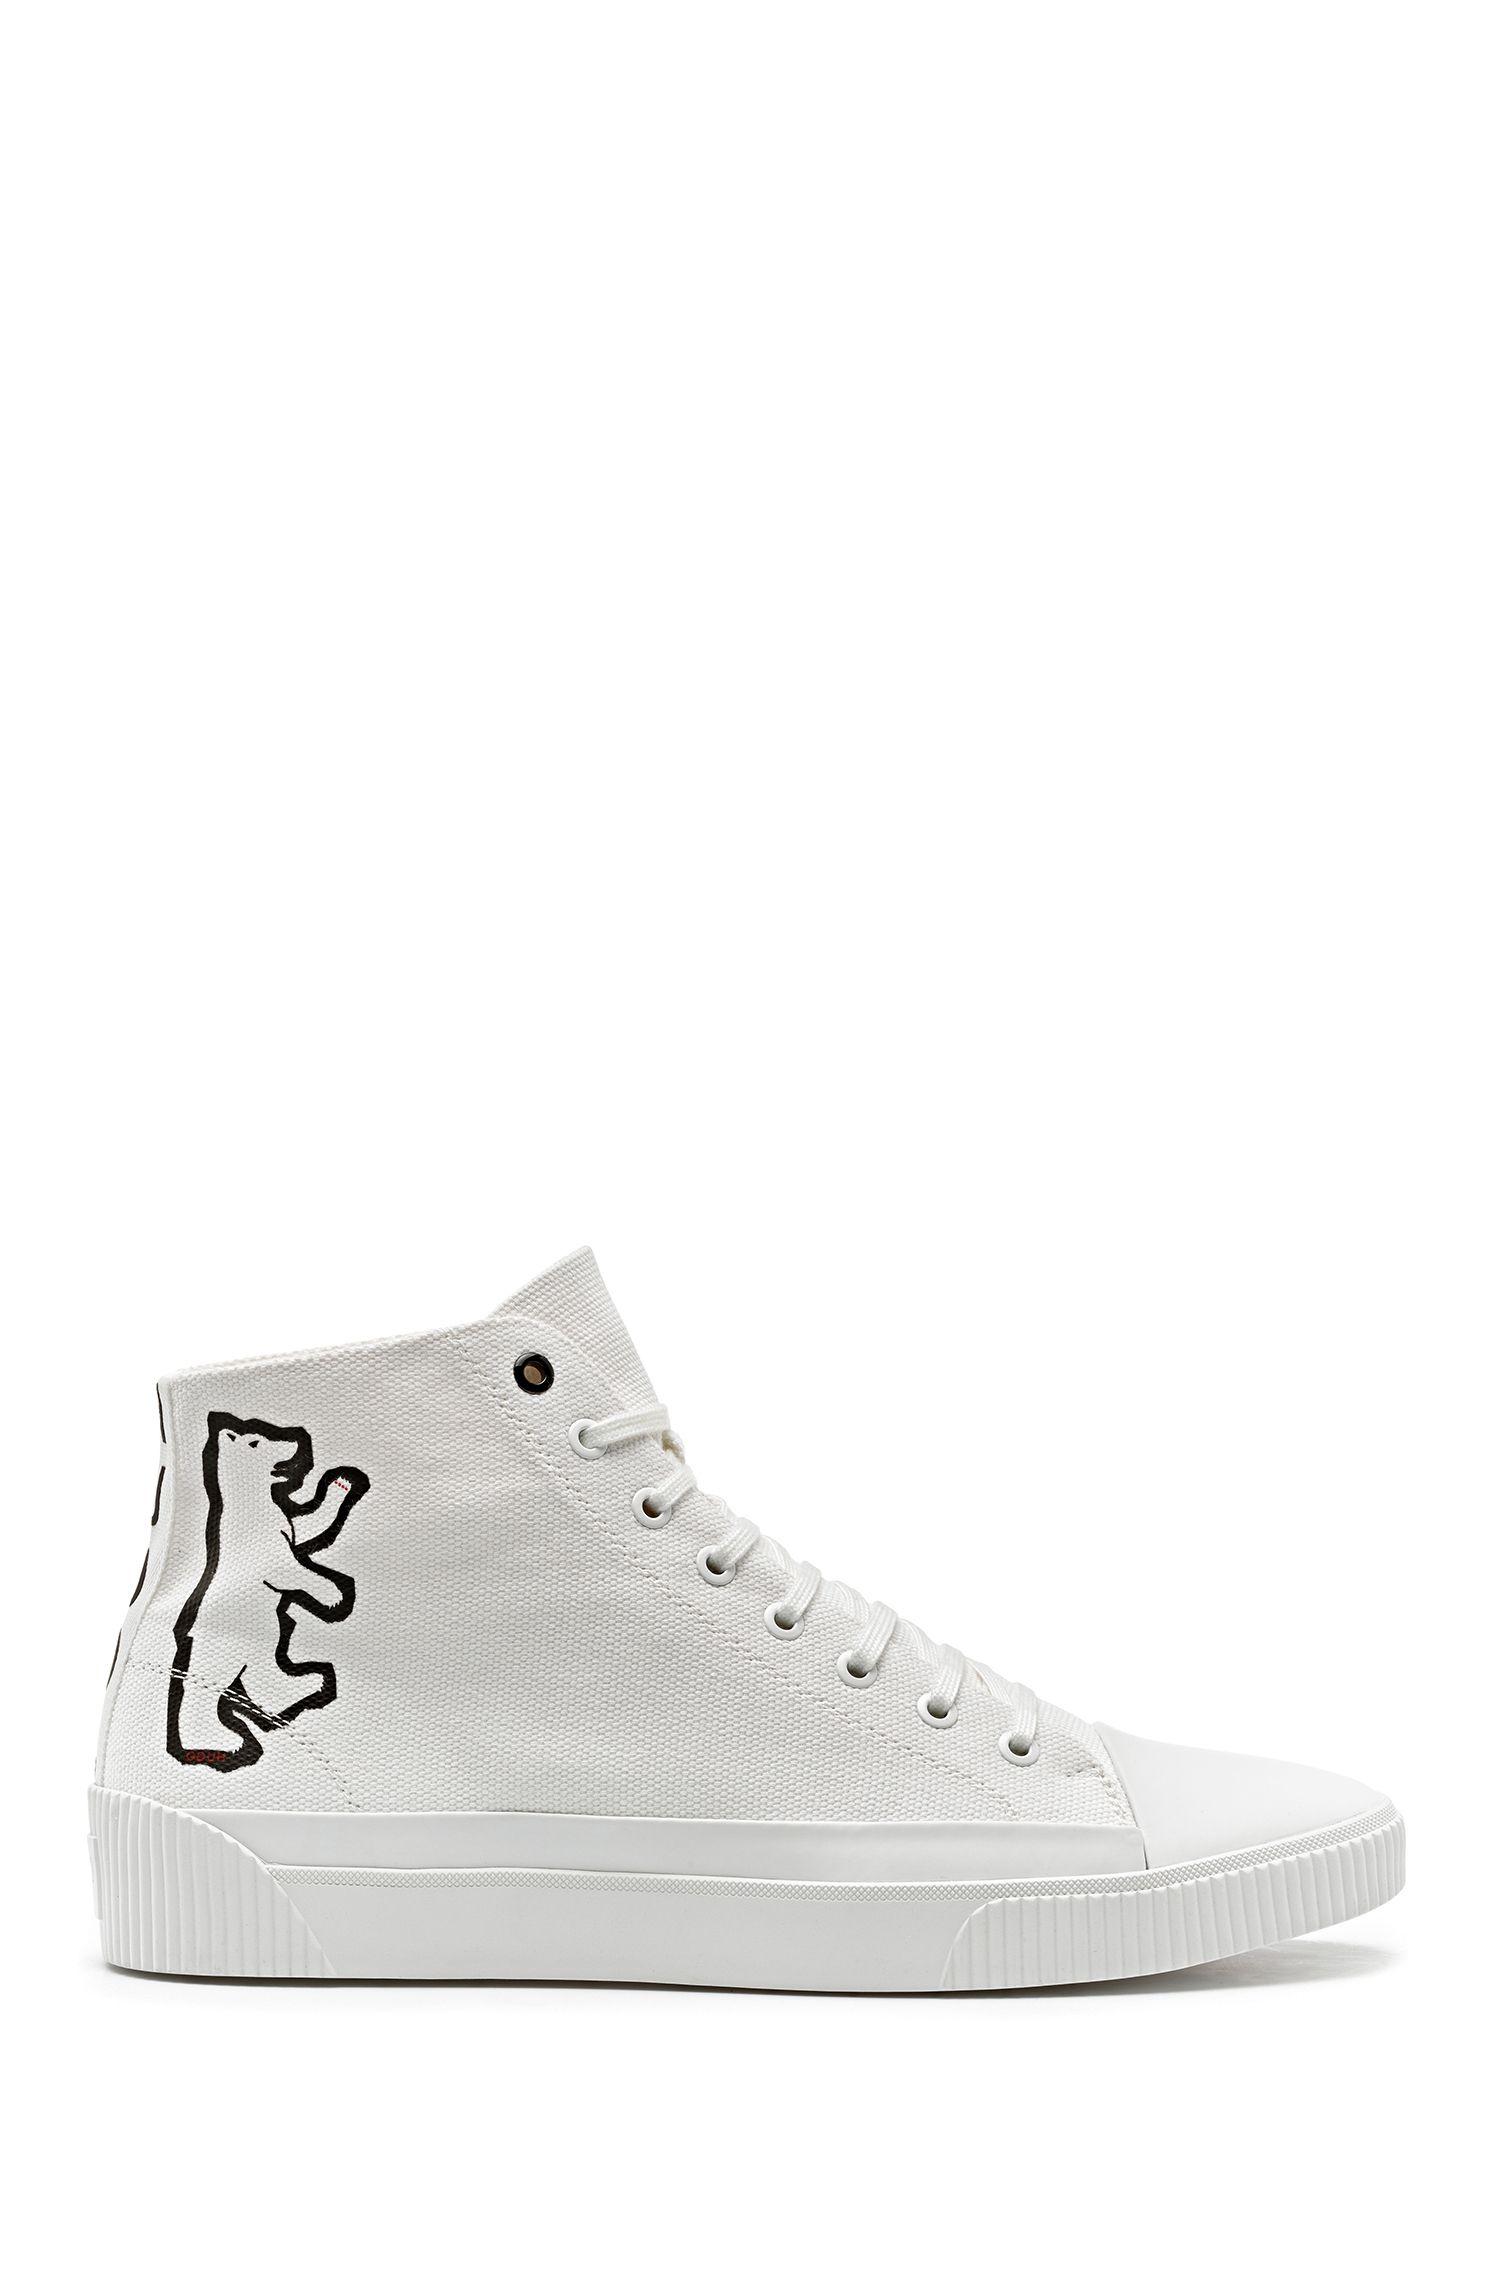 HUGO High-top Canvas Sneakers With Bear Motif in White for Men - Lyst